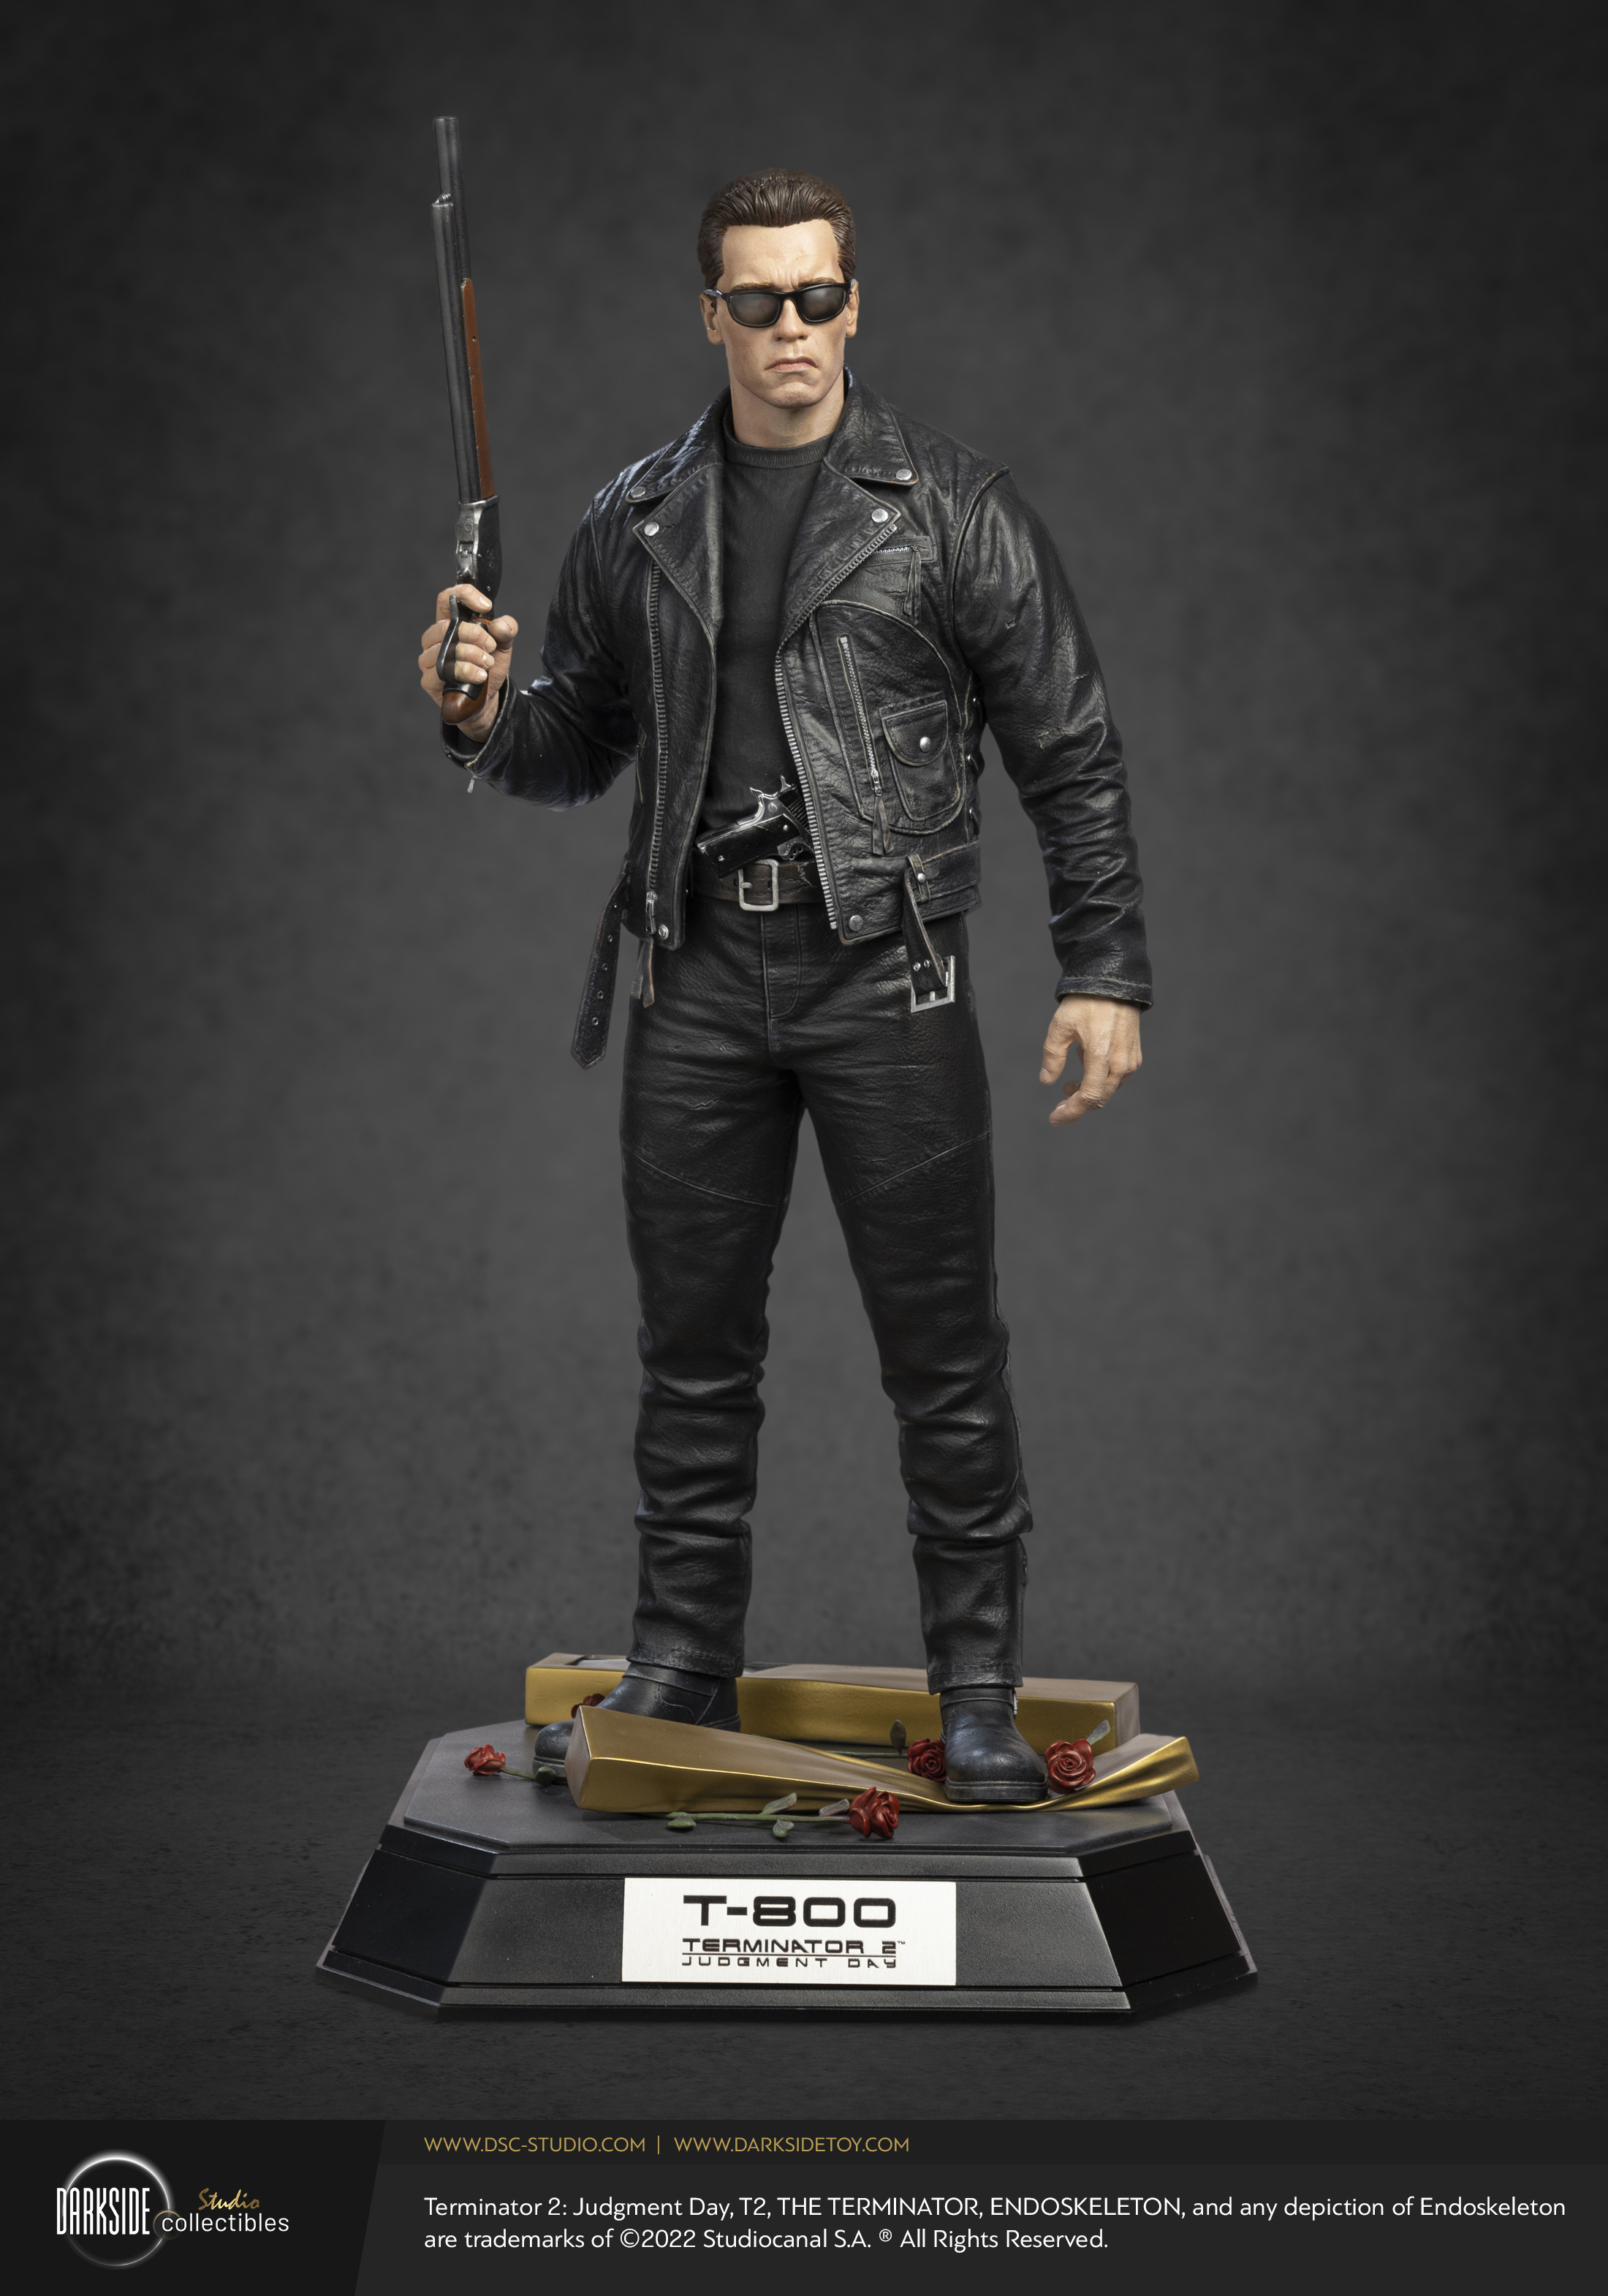 T-800 Terminator 2 Judgement Day 30th Anniversary Signature Premium 1/3 Scale Ultimate Edition Statue by Darkside Collectibles